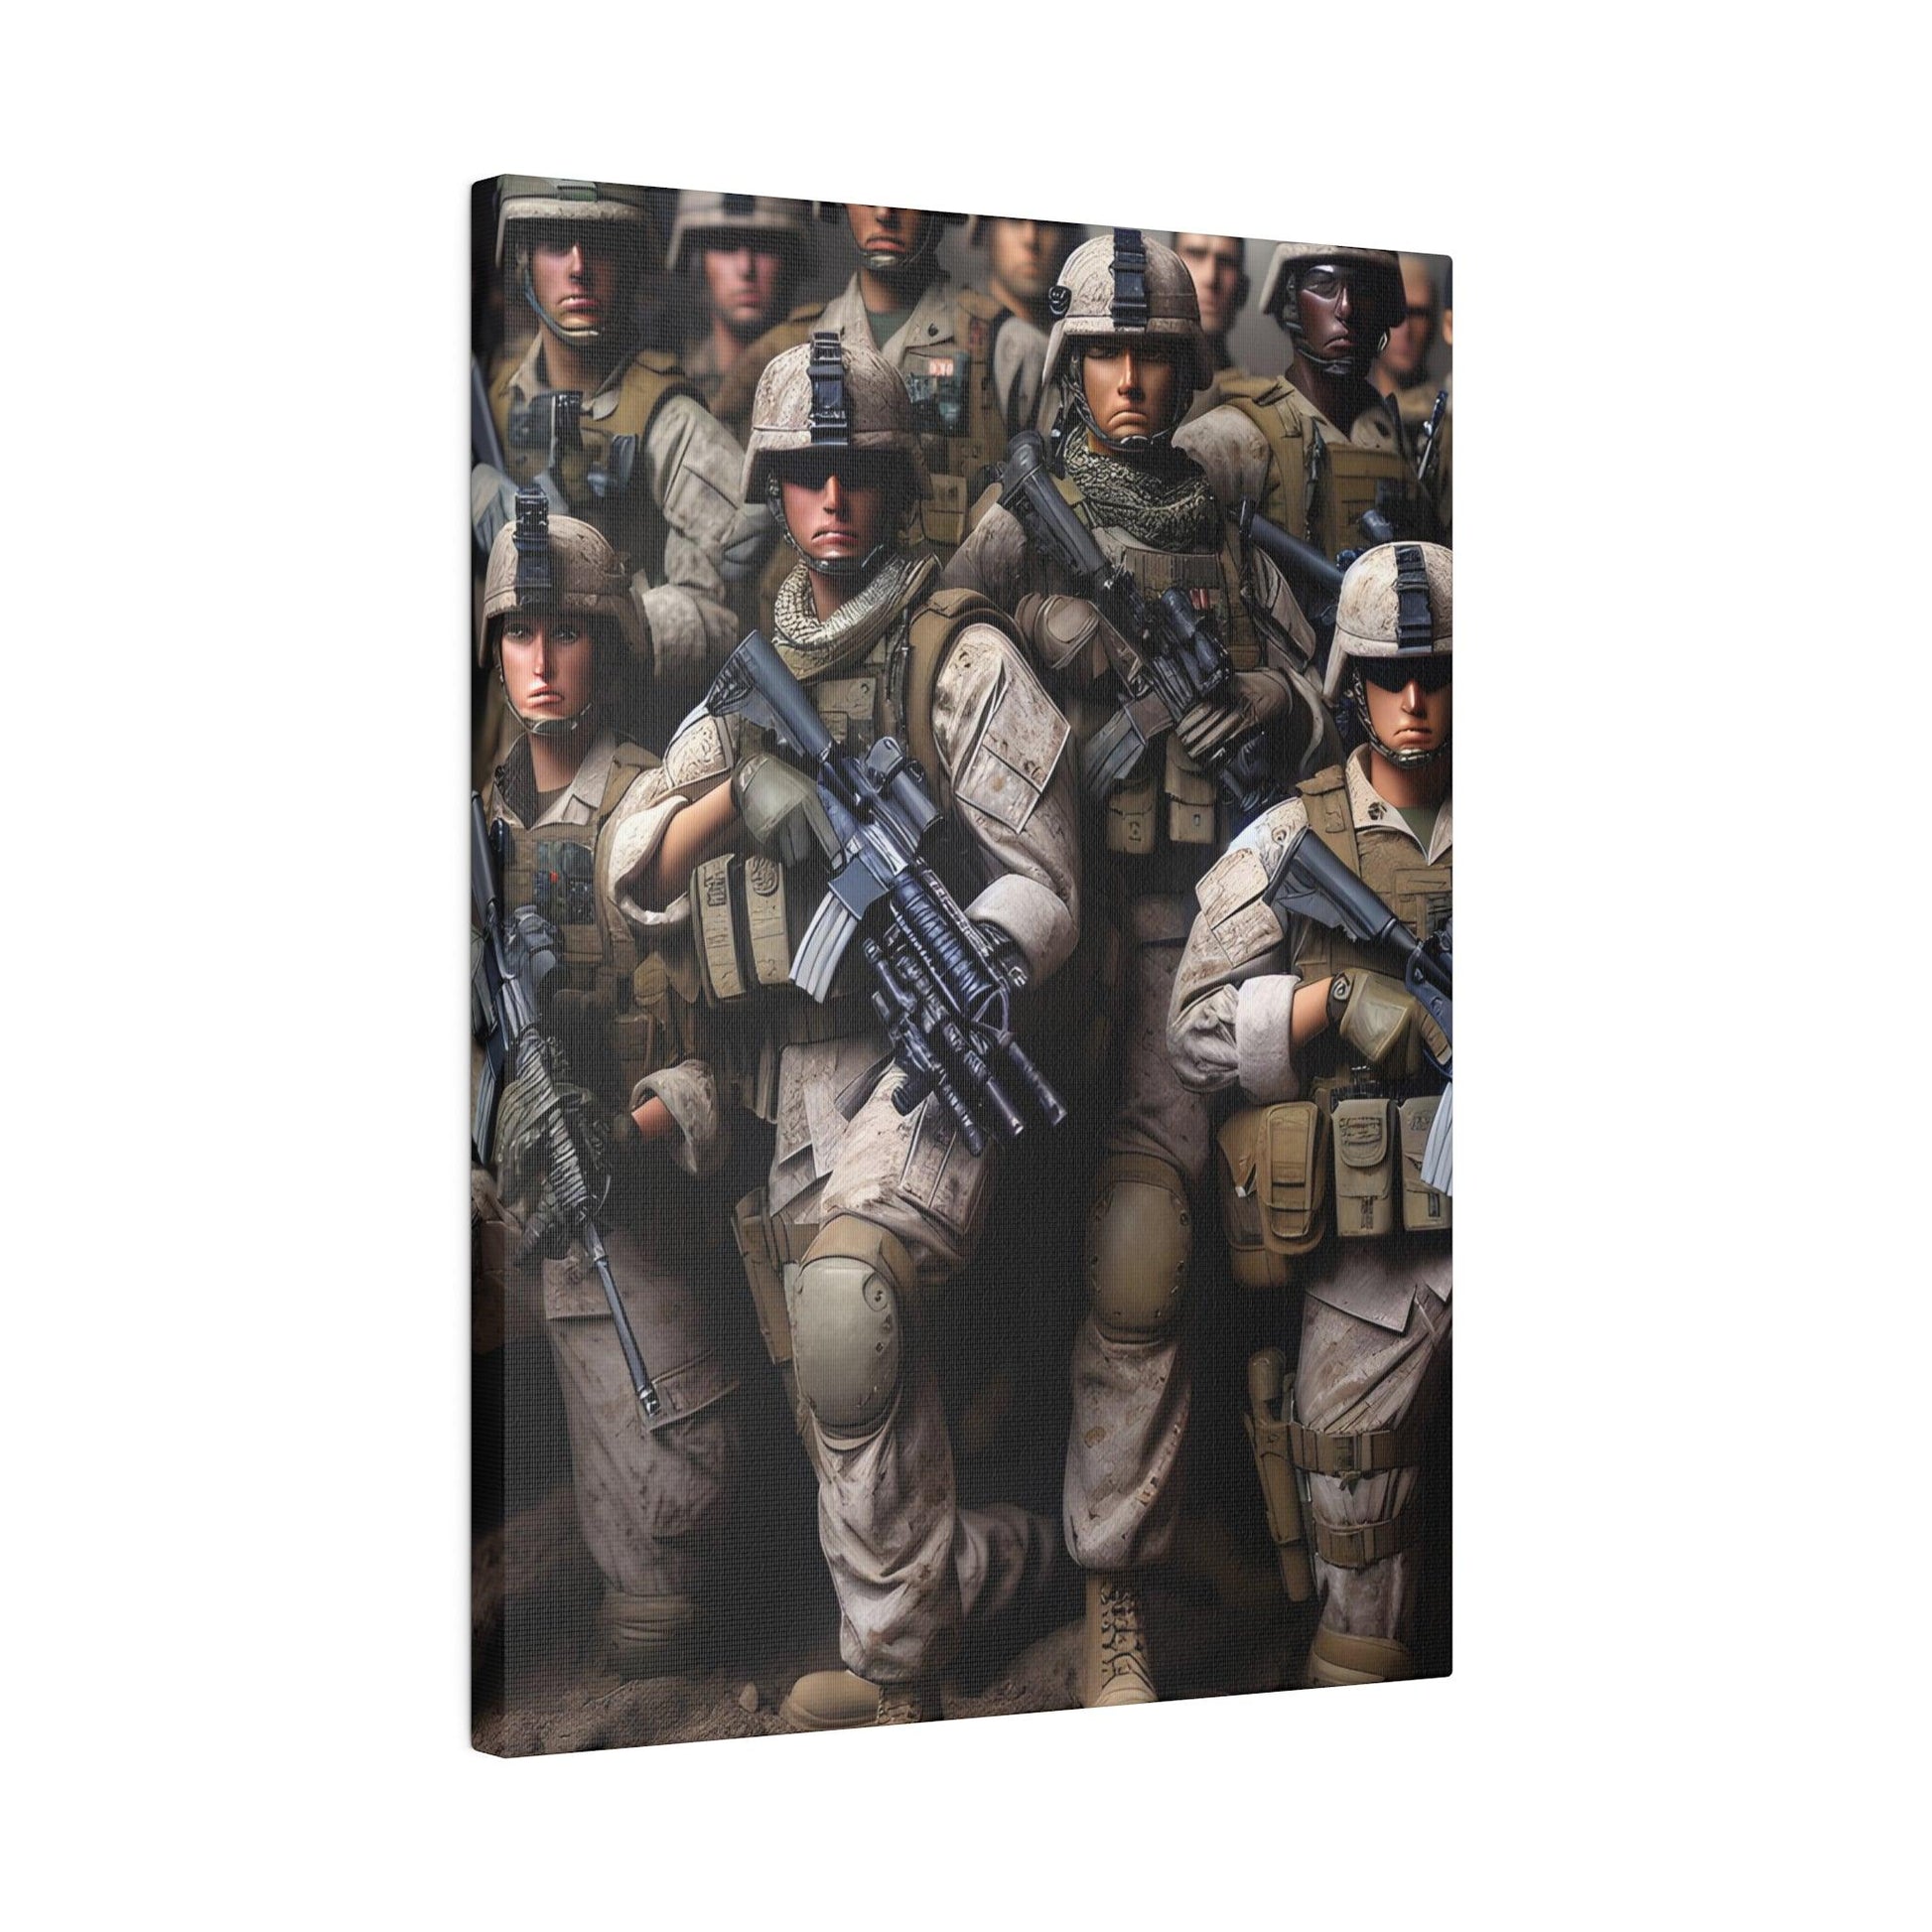 "Valor Radiance: The Marine Corps Legacy Canvas Wall Art" - The Alice Gallery